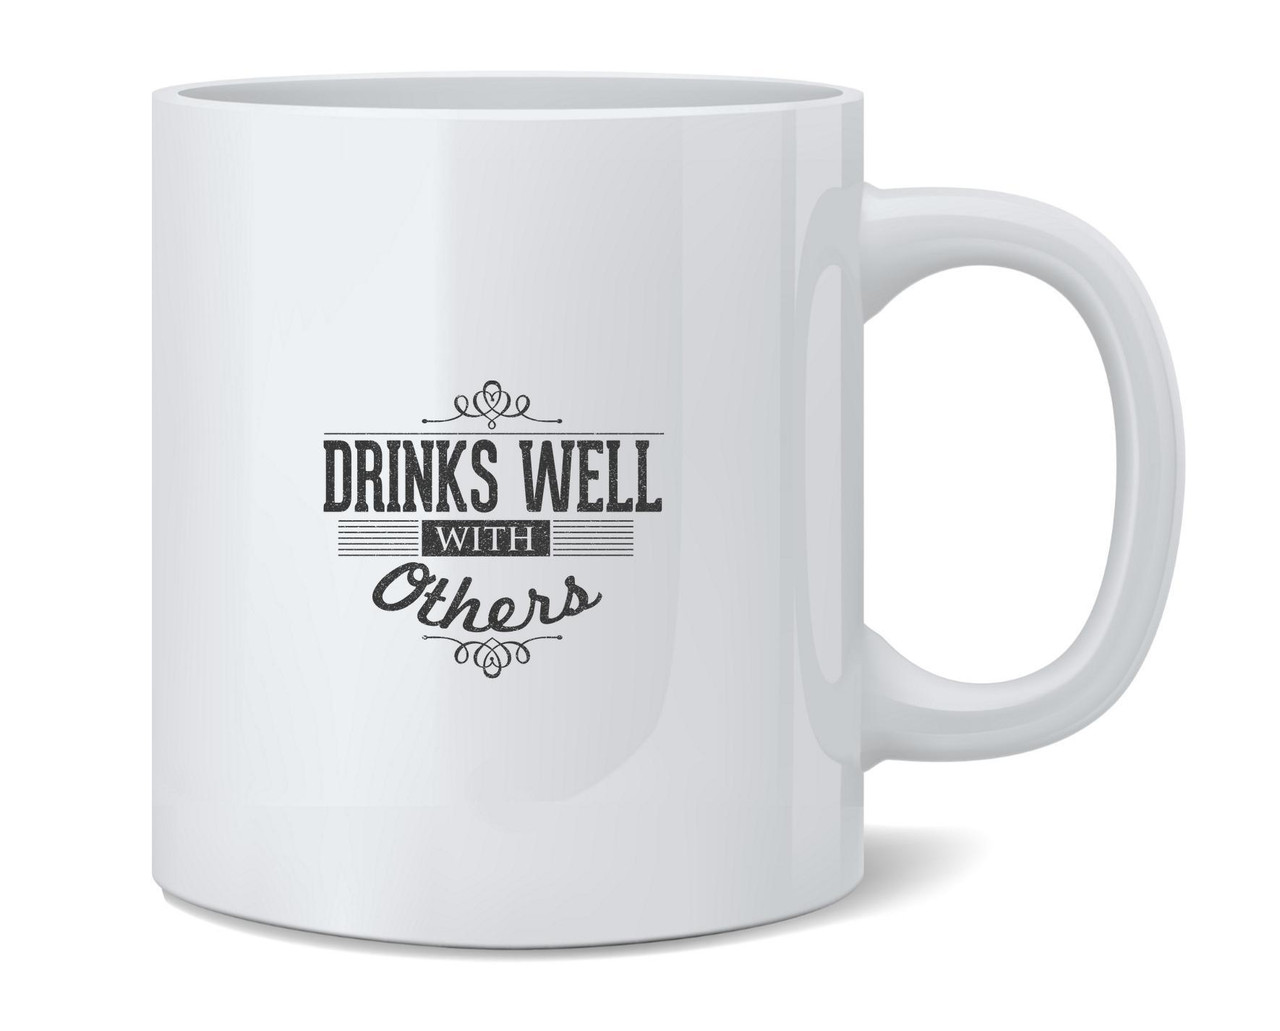 Drinks Well with Others Funny Ceramic Coffee Mug Tea Cup Fun Novelty Gift  12 oz - Poster Foundry